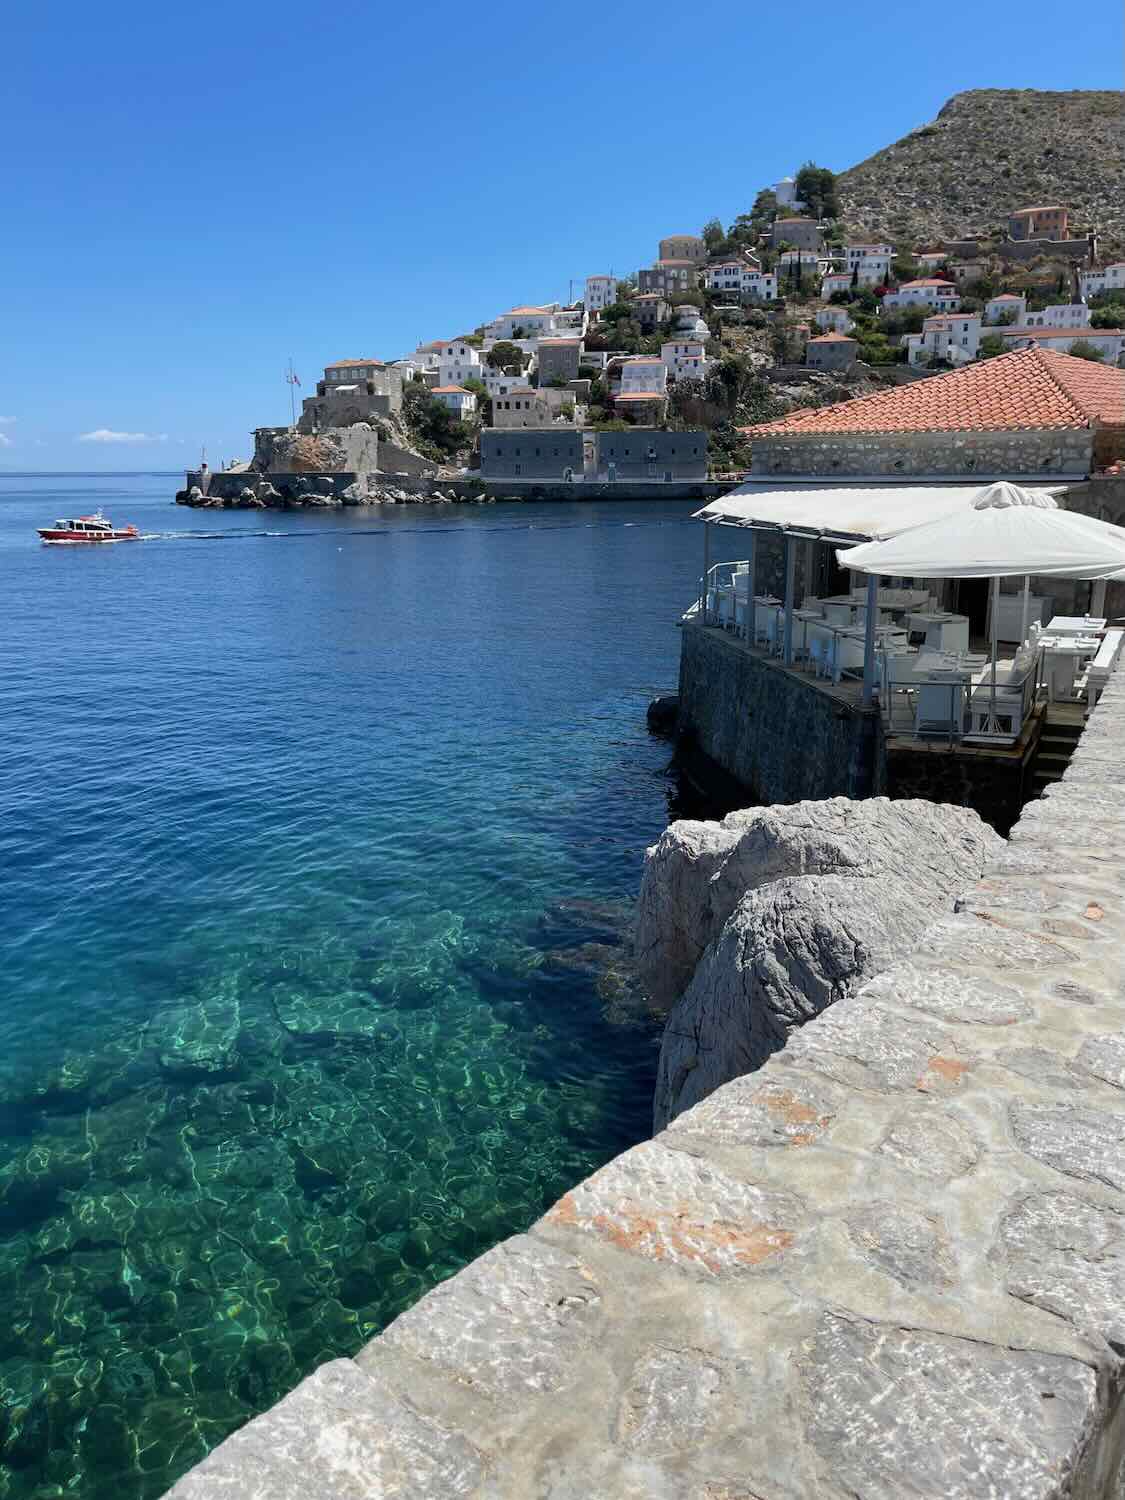 Scenic view of the waterfront and terraced houses of Hydra from Omilos, showcasing the serene blue waters and clear skies on a sunny day.